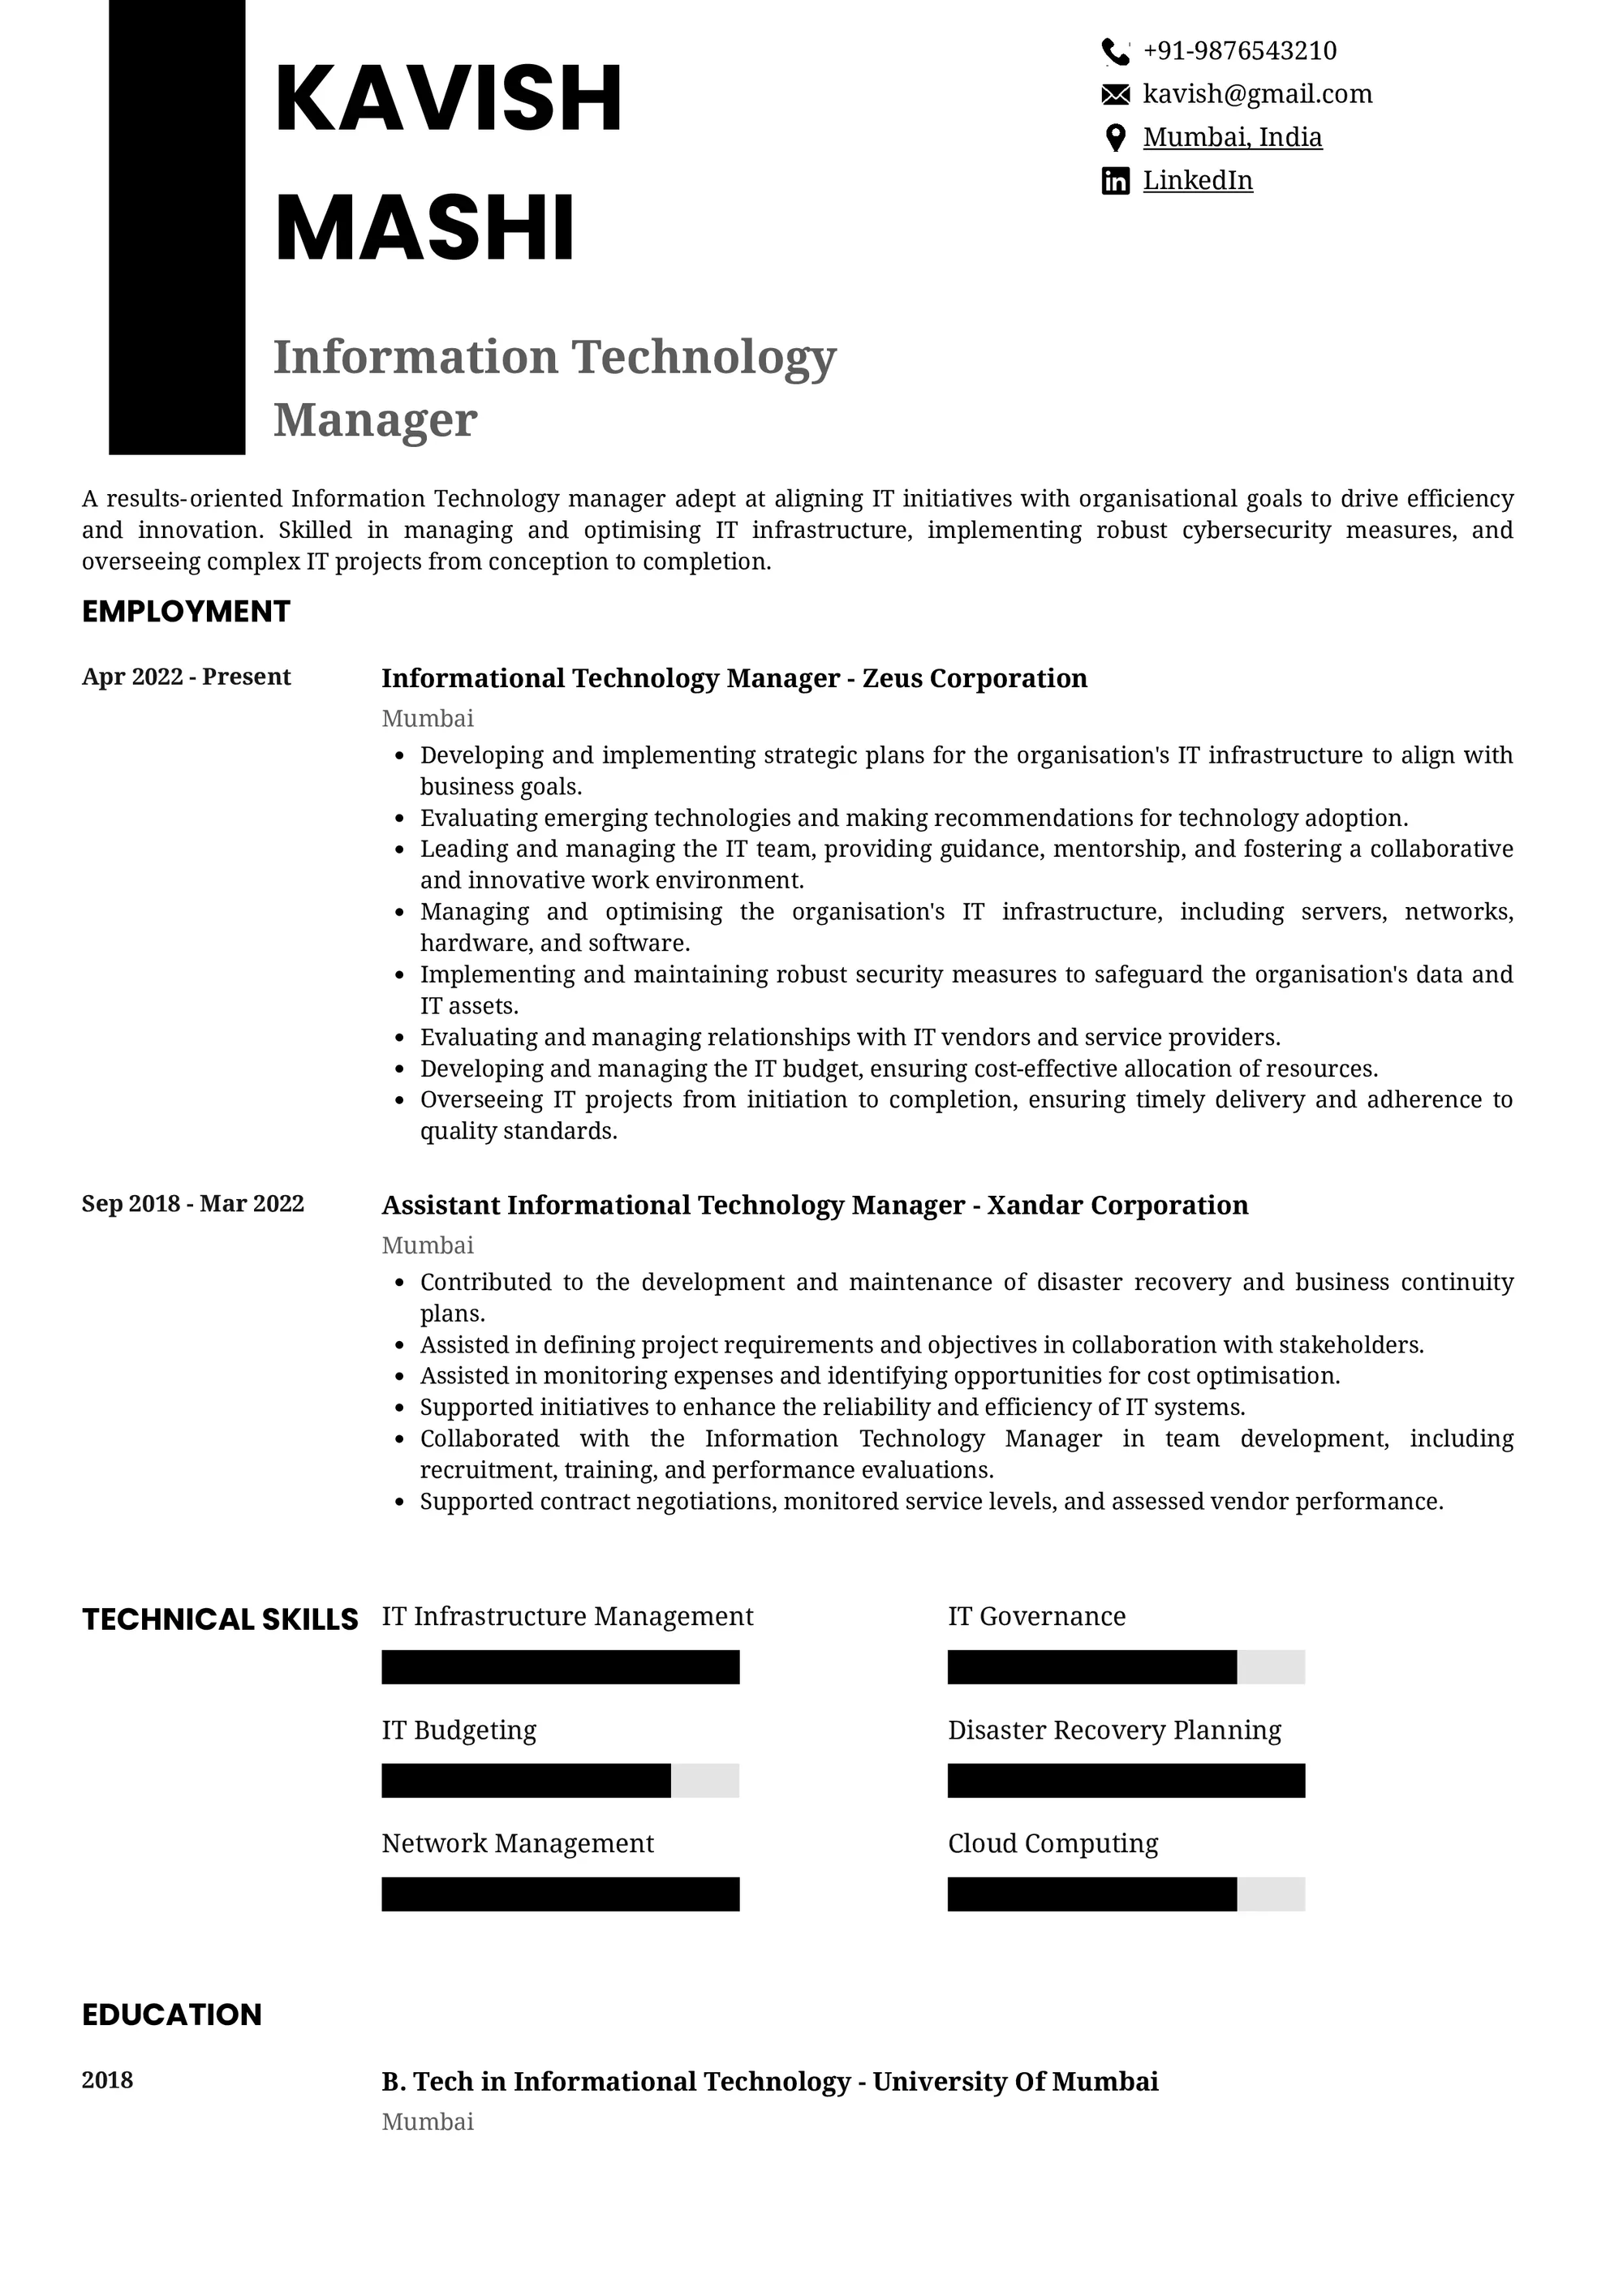 Resume of Information Technology Manager built on Resumod